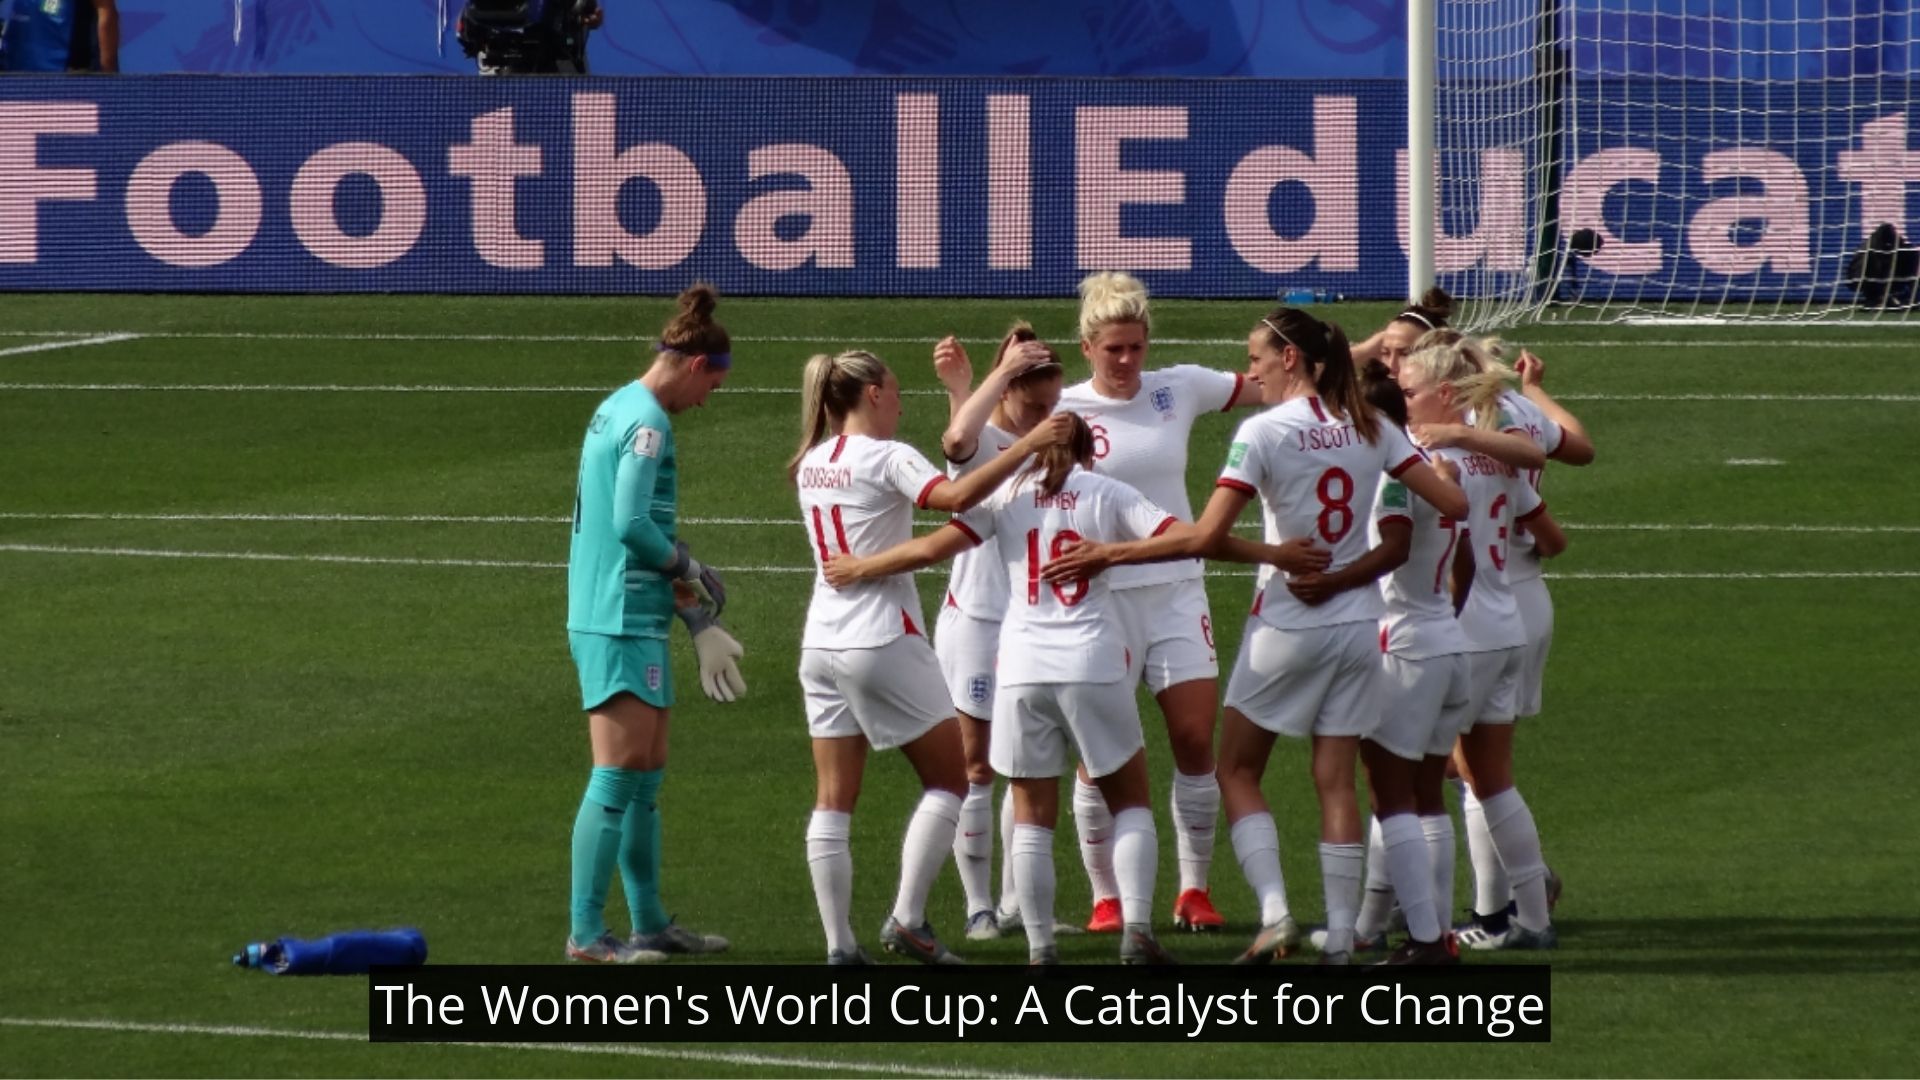 The Women's World Cup A Catalyst for Change